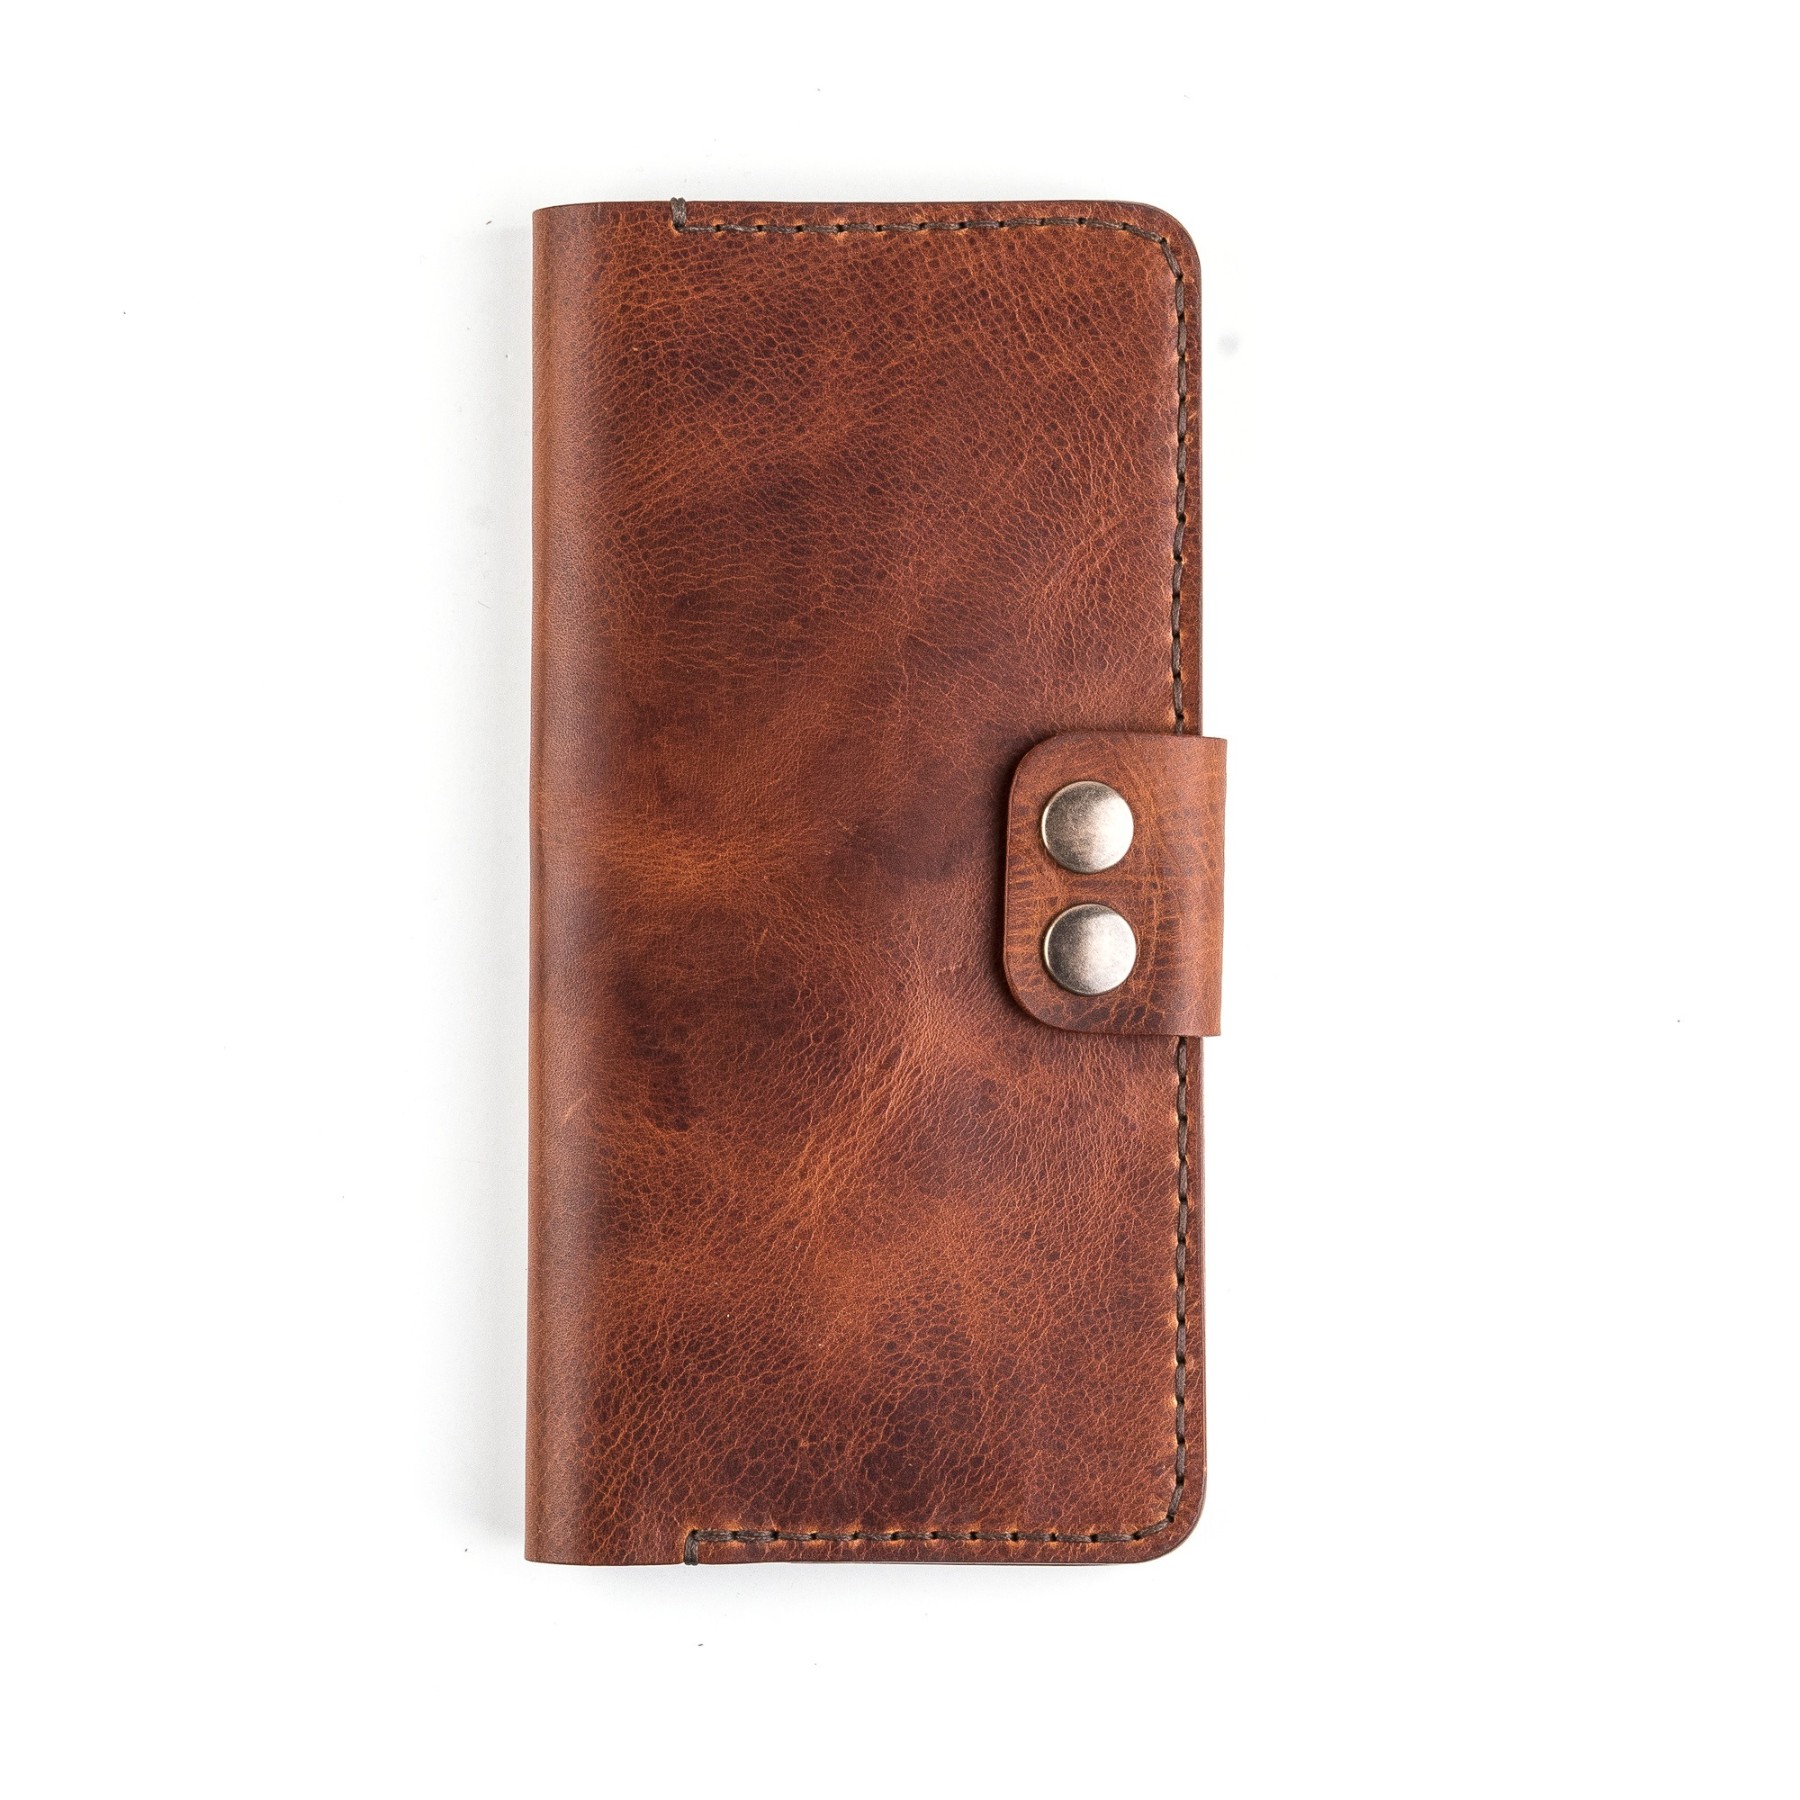 Handcrafted Leather Passport Sleeve for Travel - Stylish and Protective